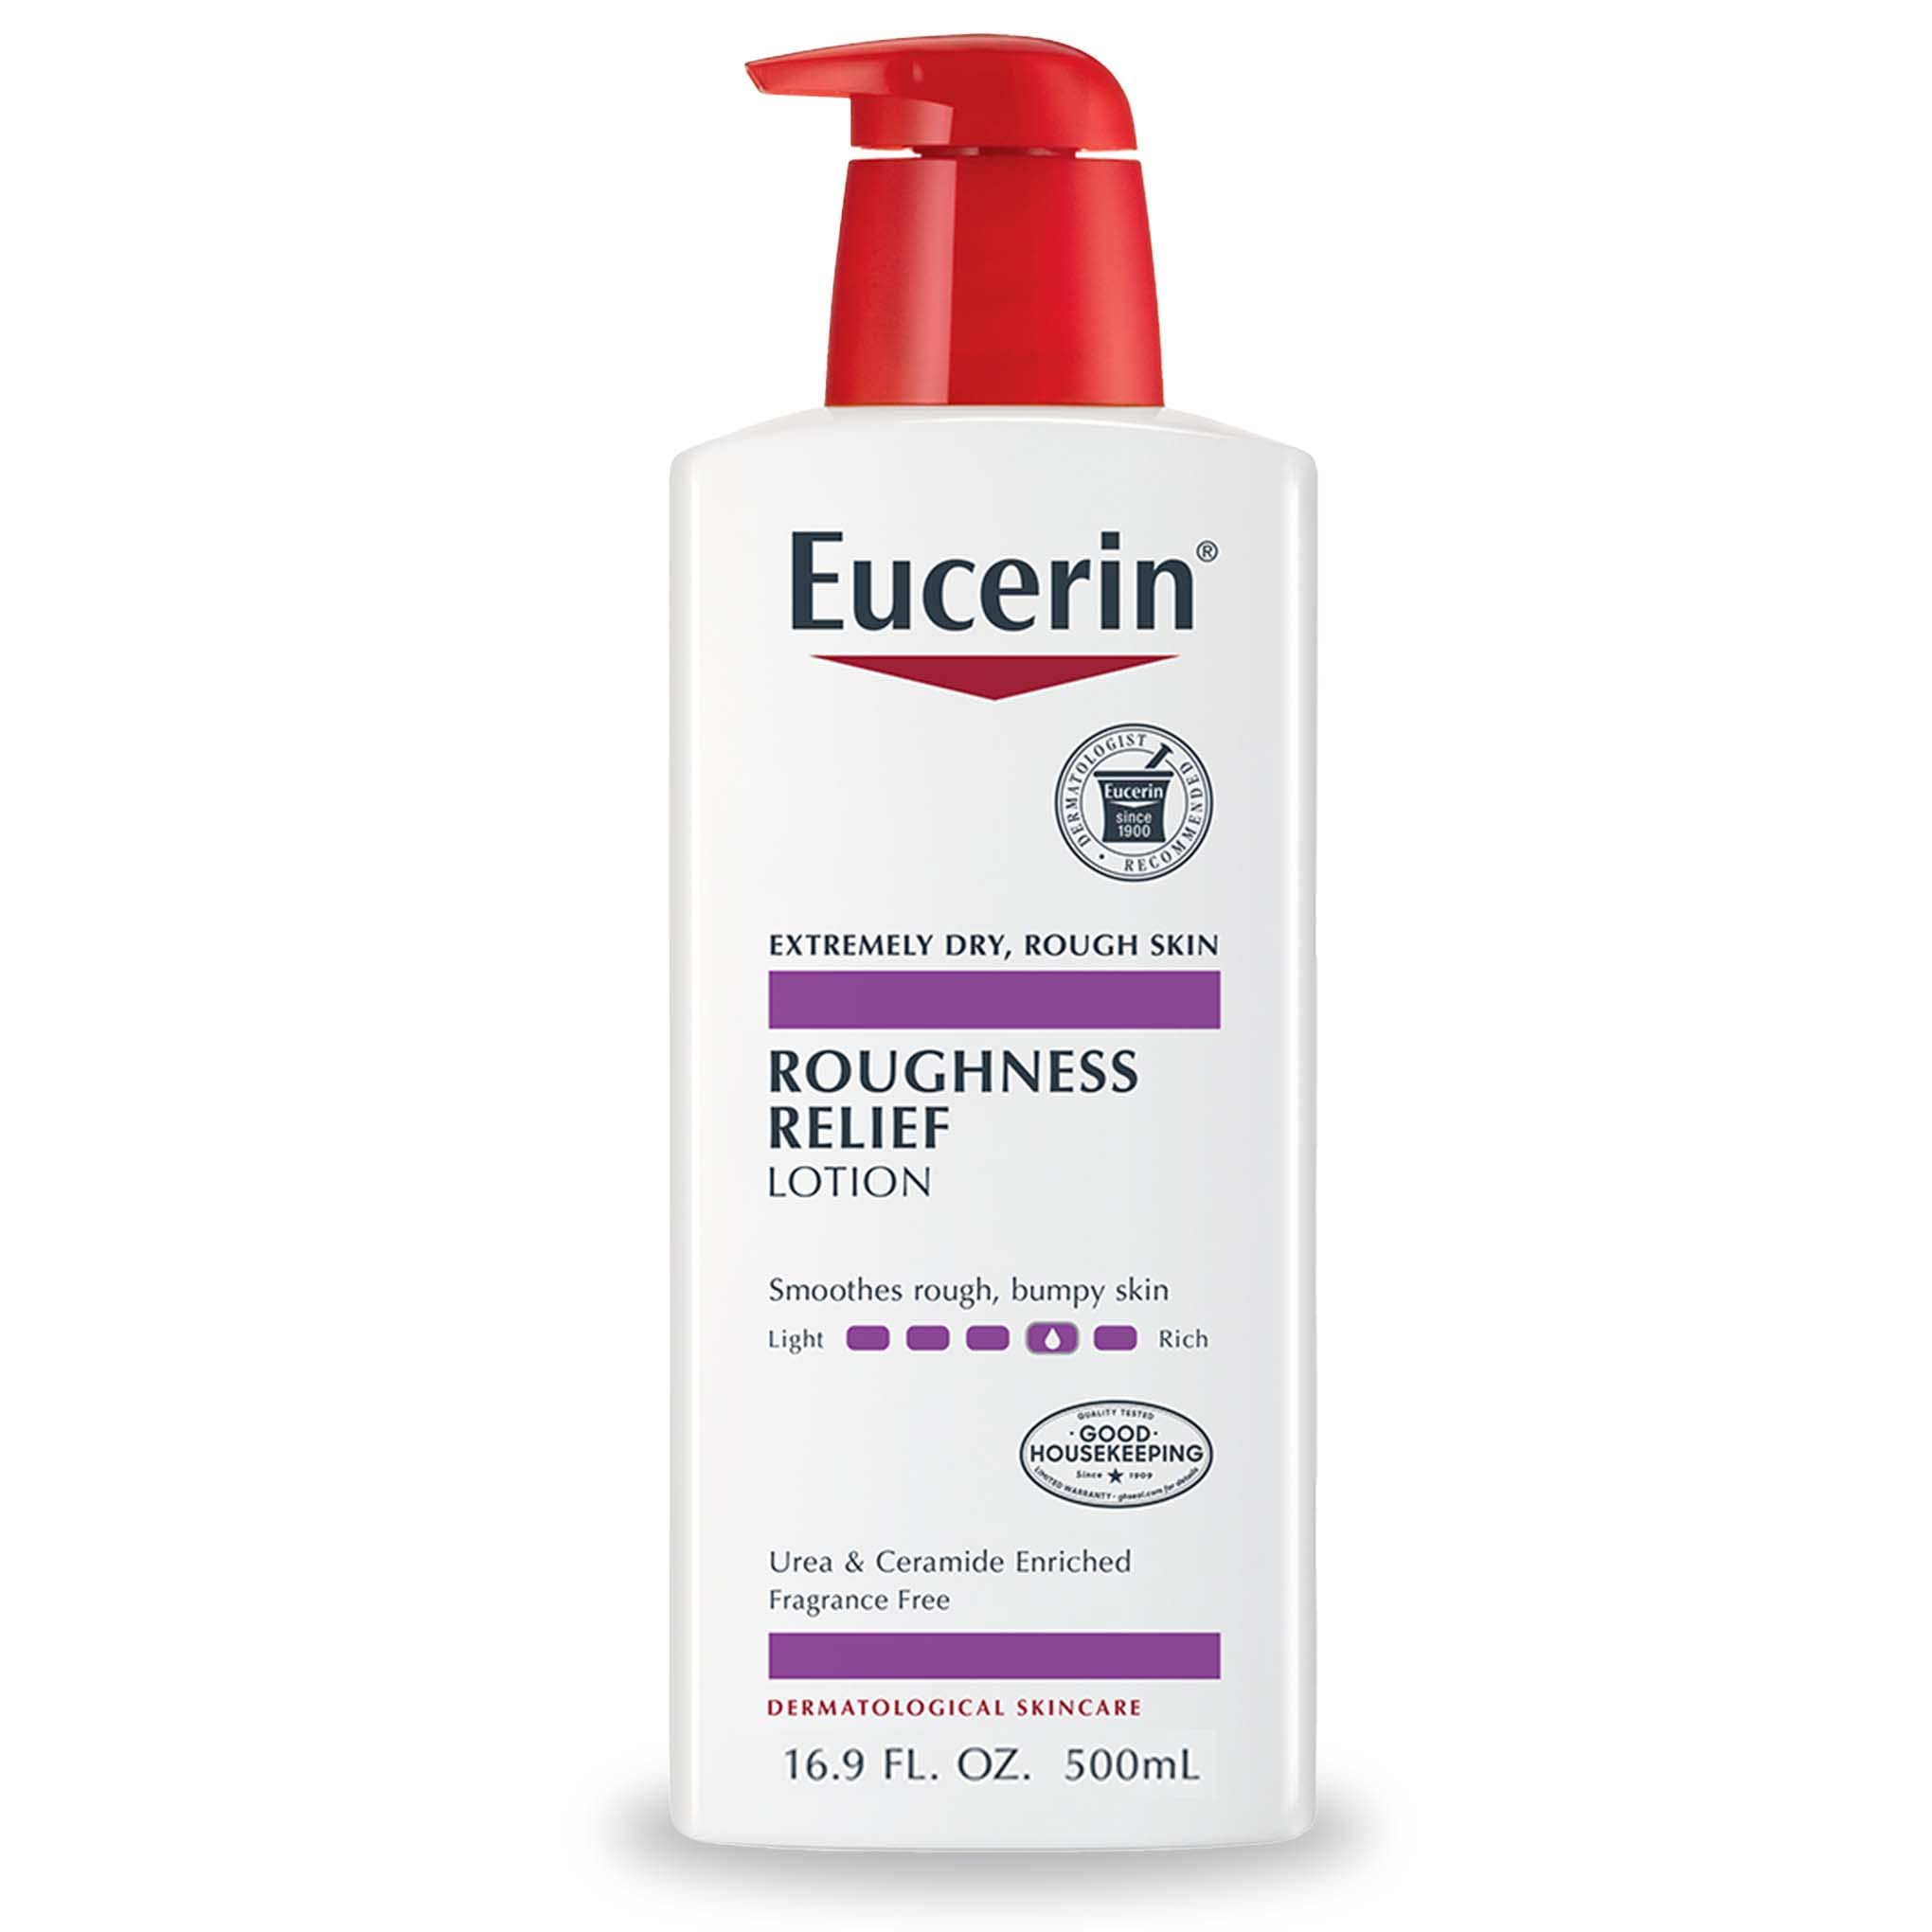 Eucerin Roughness Relief Body Lotion, Unscented Body Lotion for Dry Skin, 16.9 Fl Oz Pump Bottle